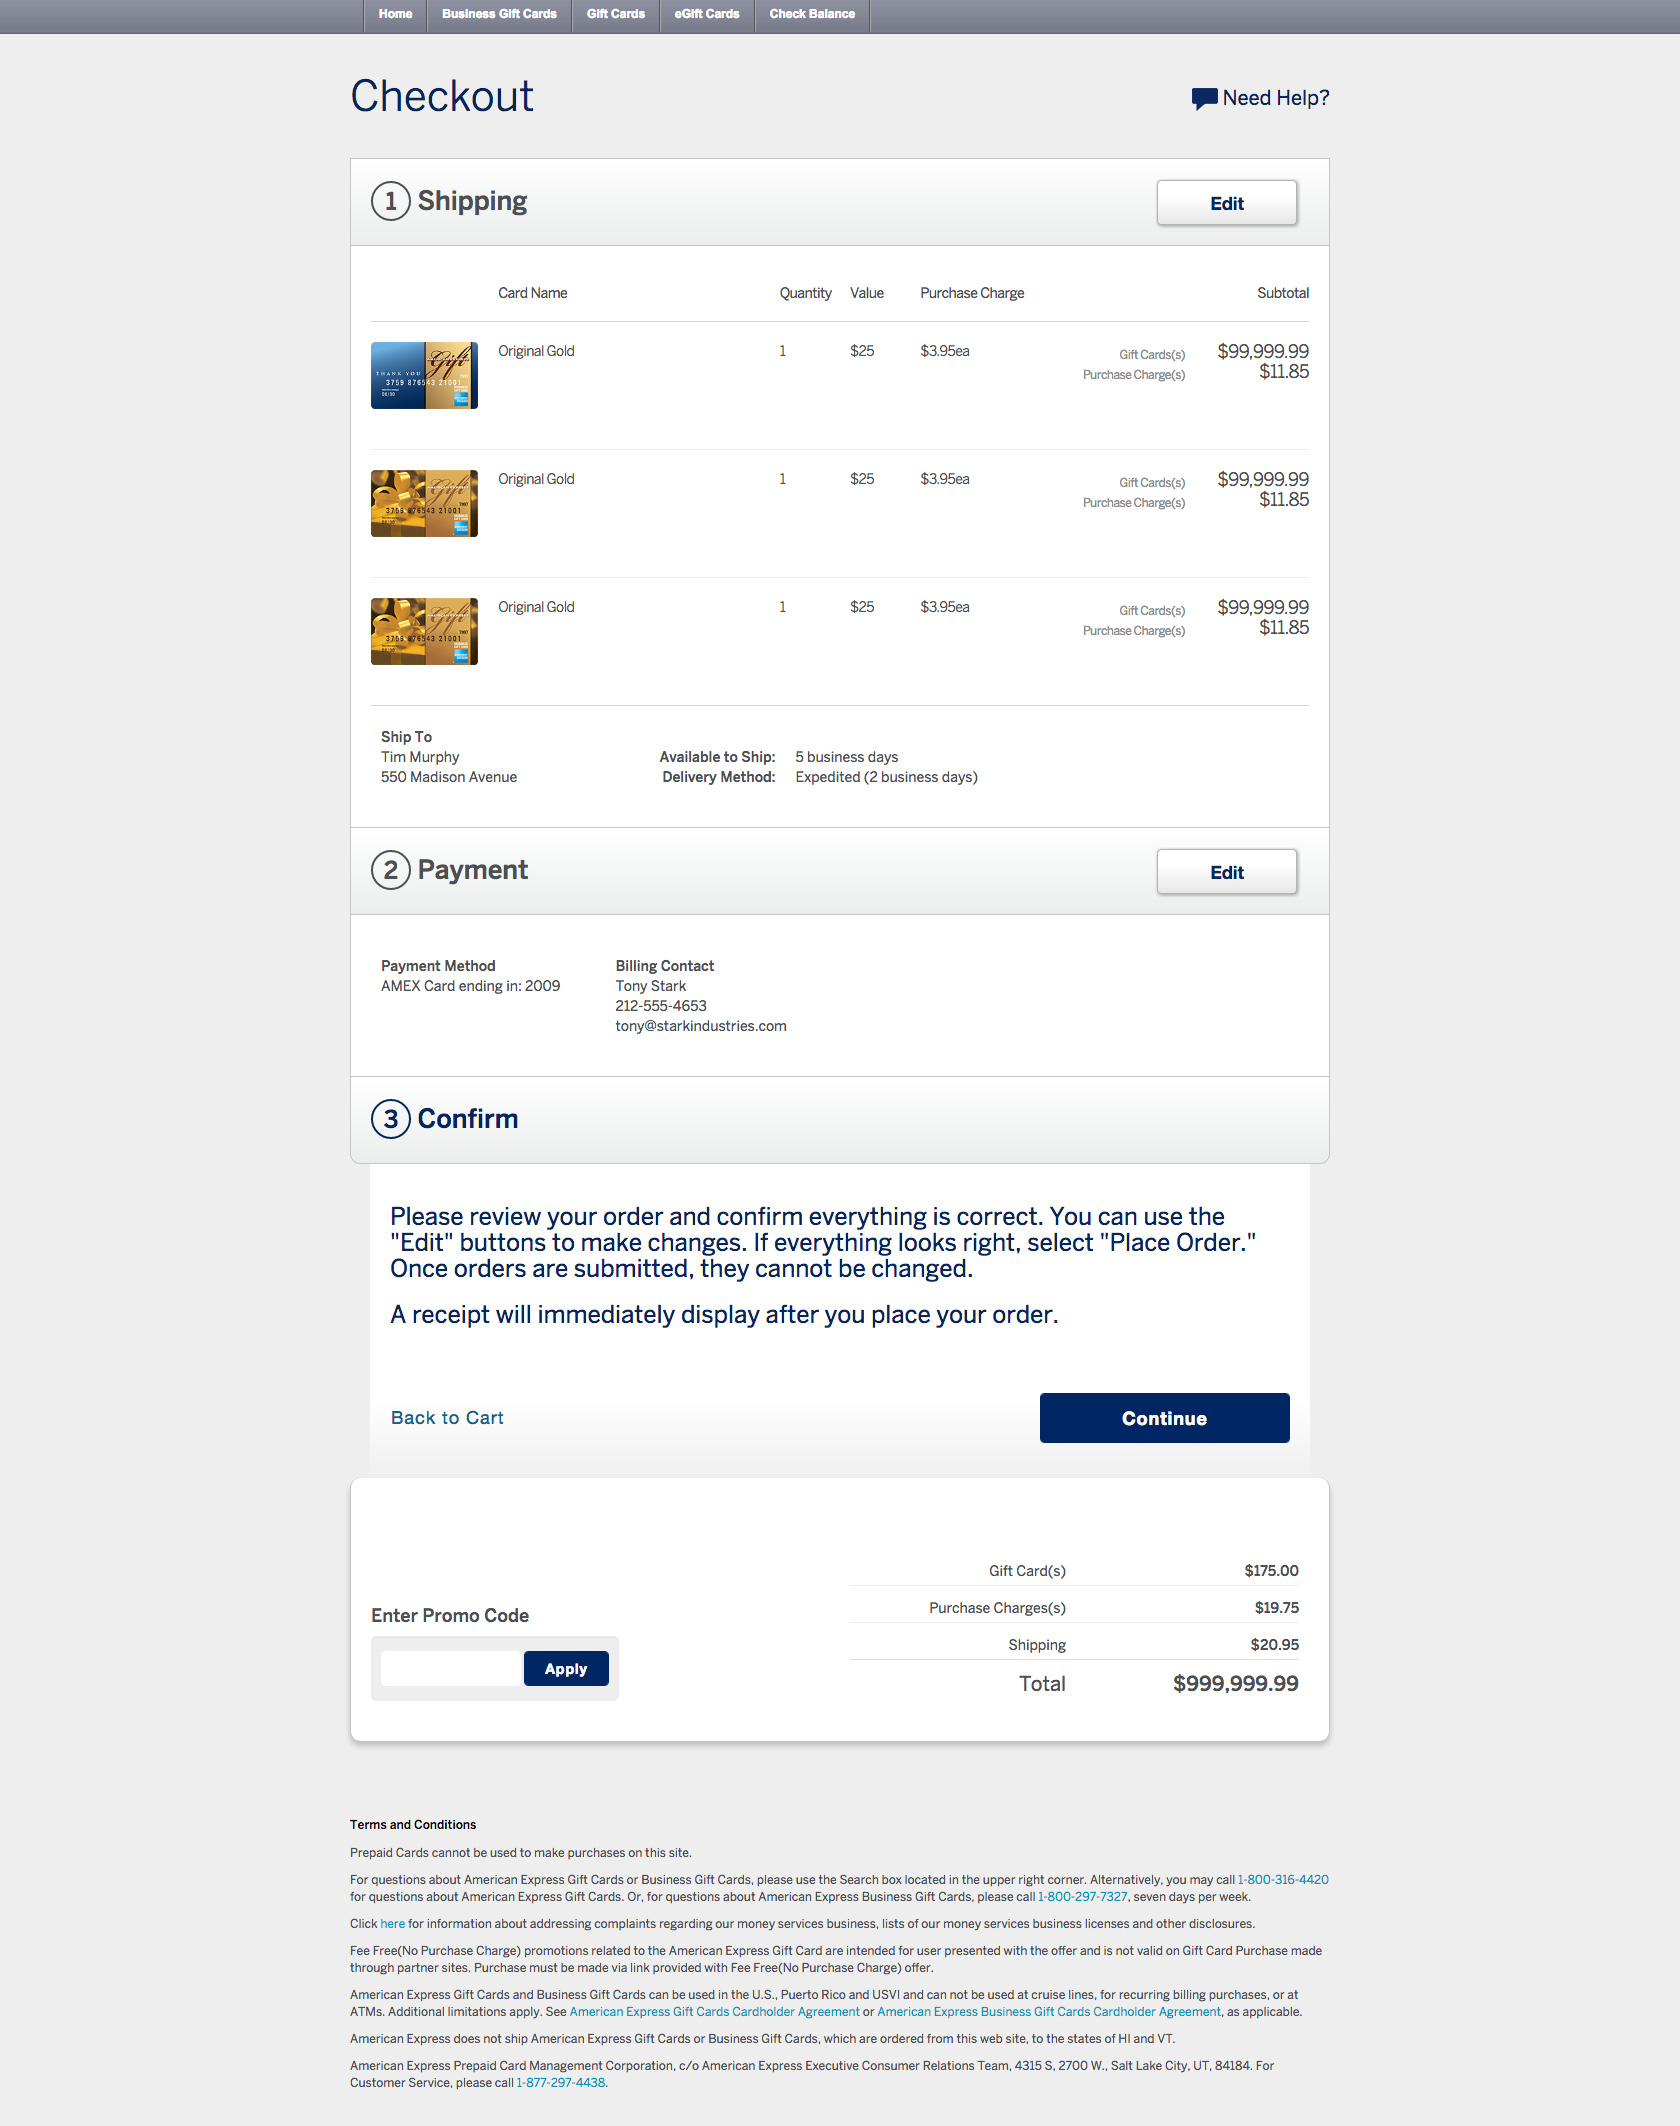 Busines to consumer order confimation for logged in amex cardholders